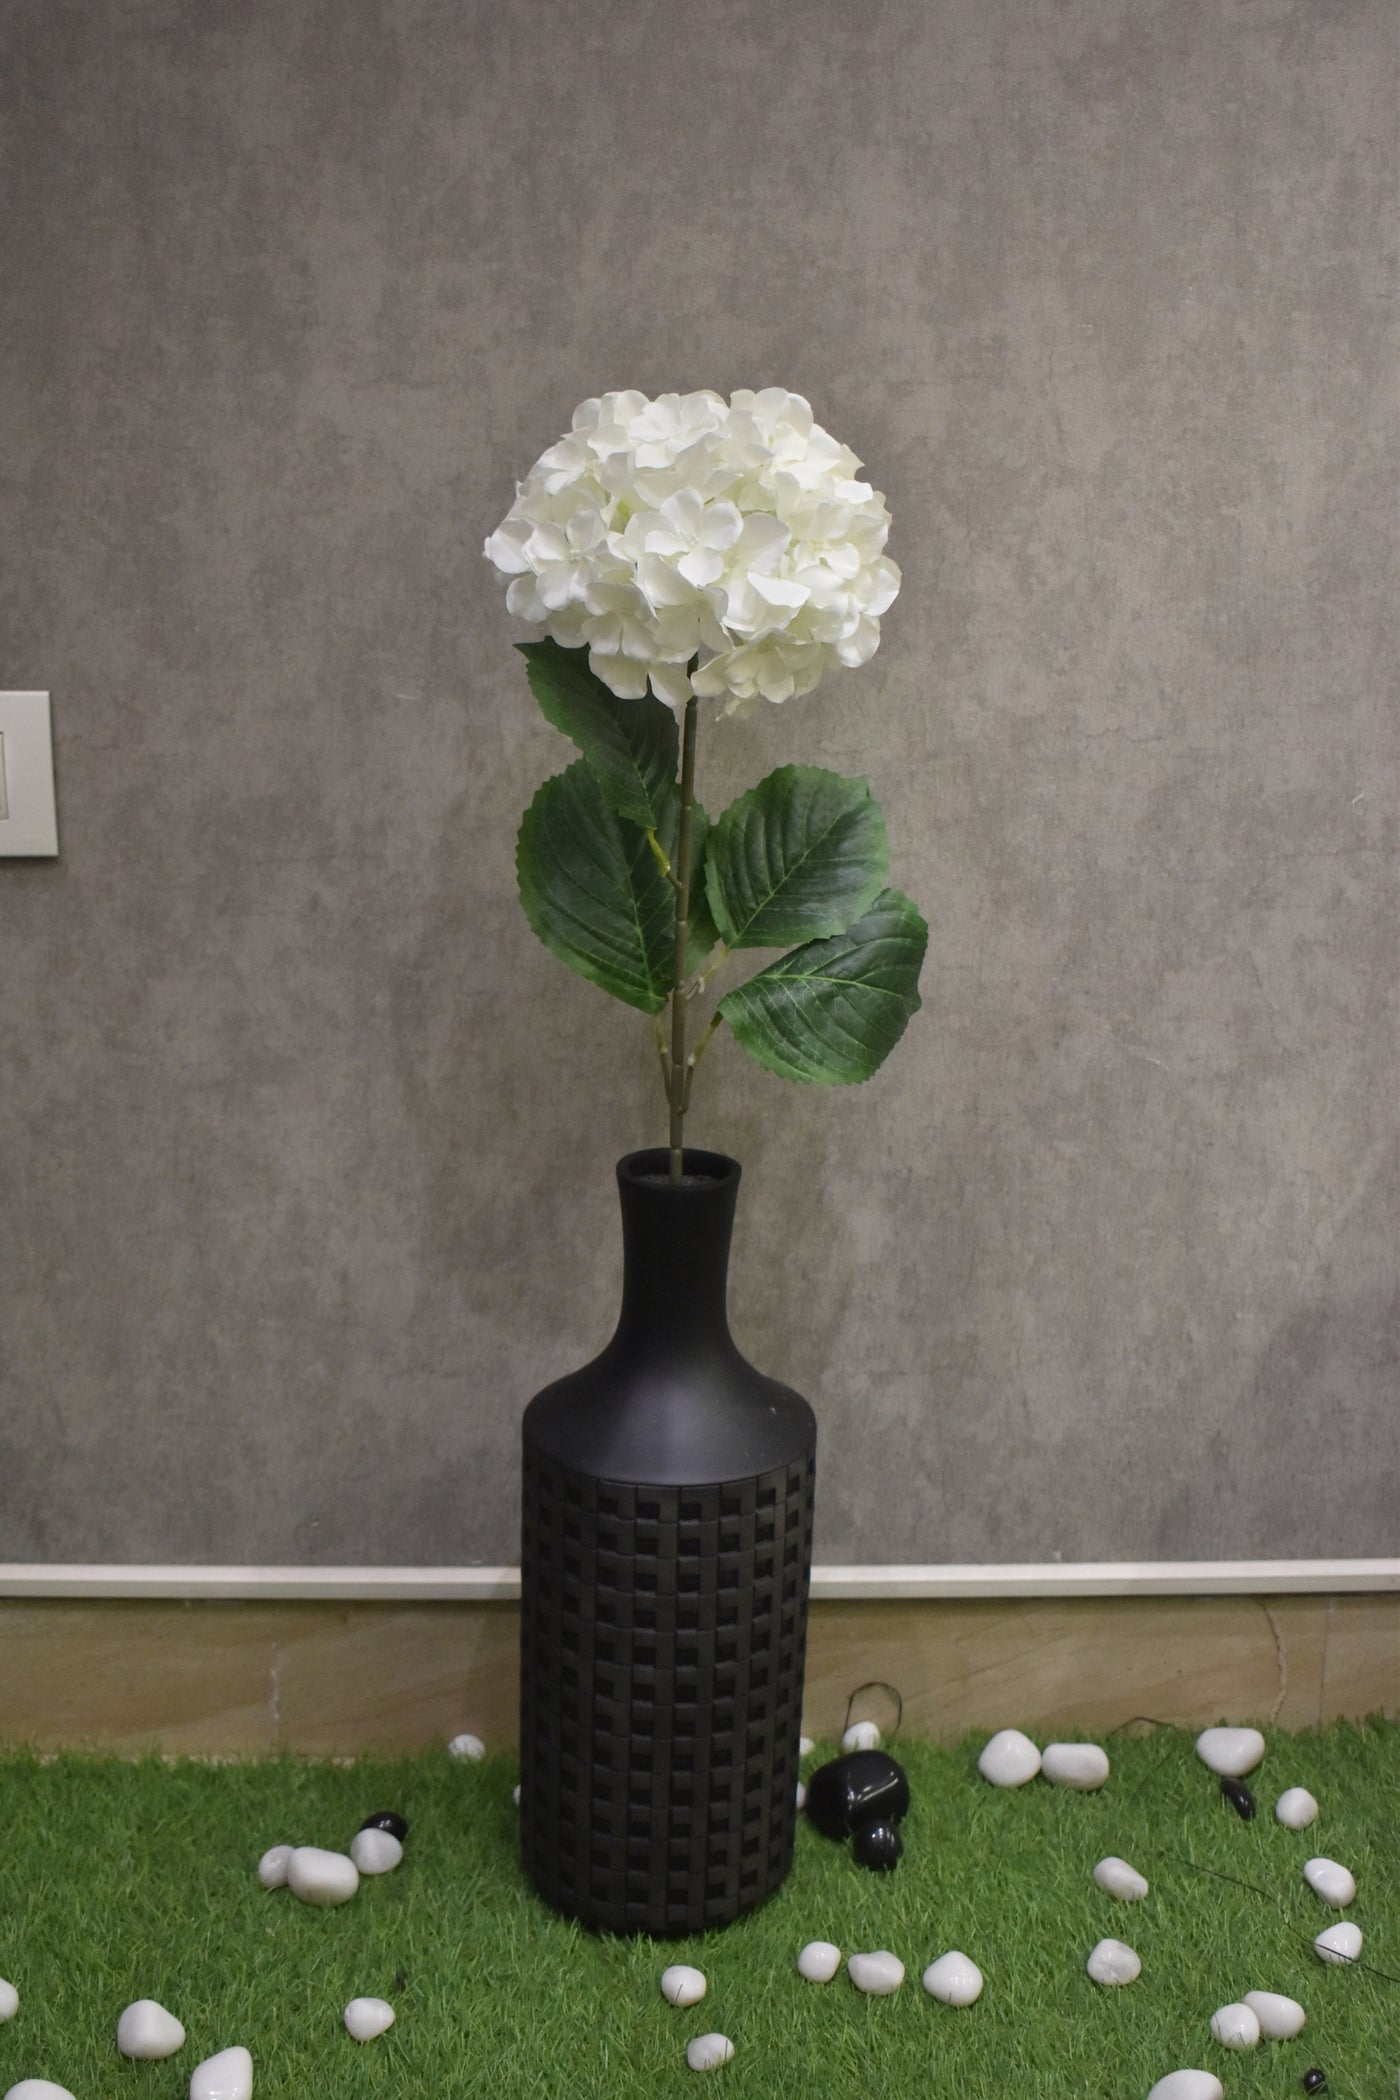 Hydrangea Artificial Flowers for your home or office decor